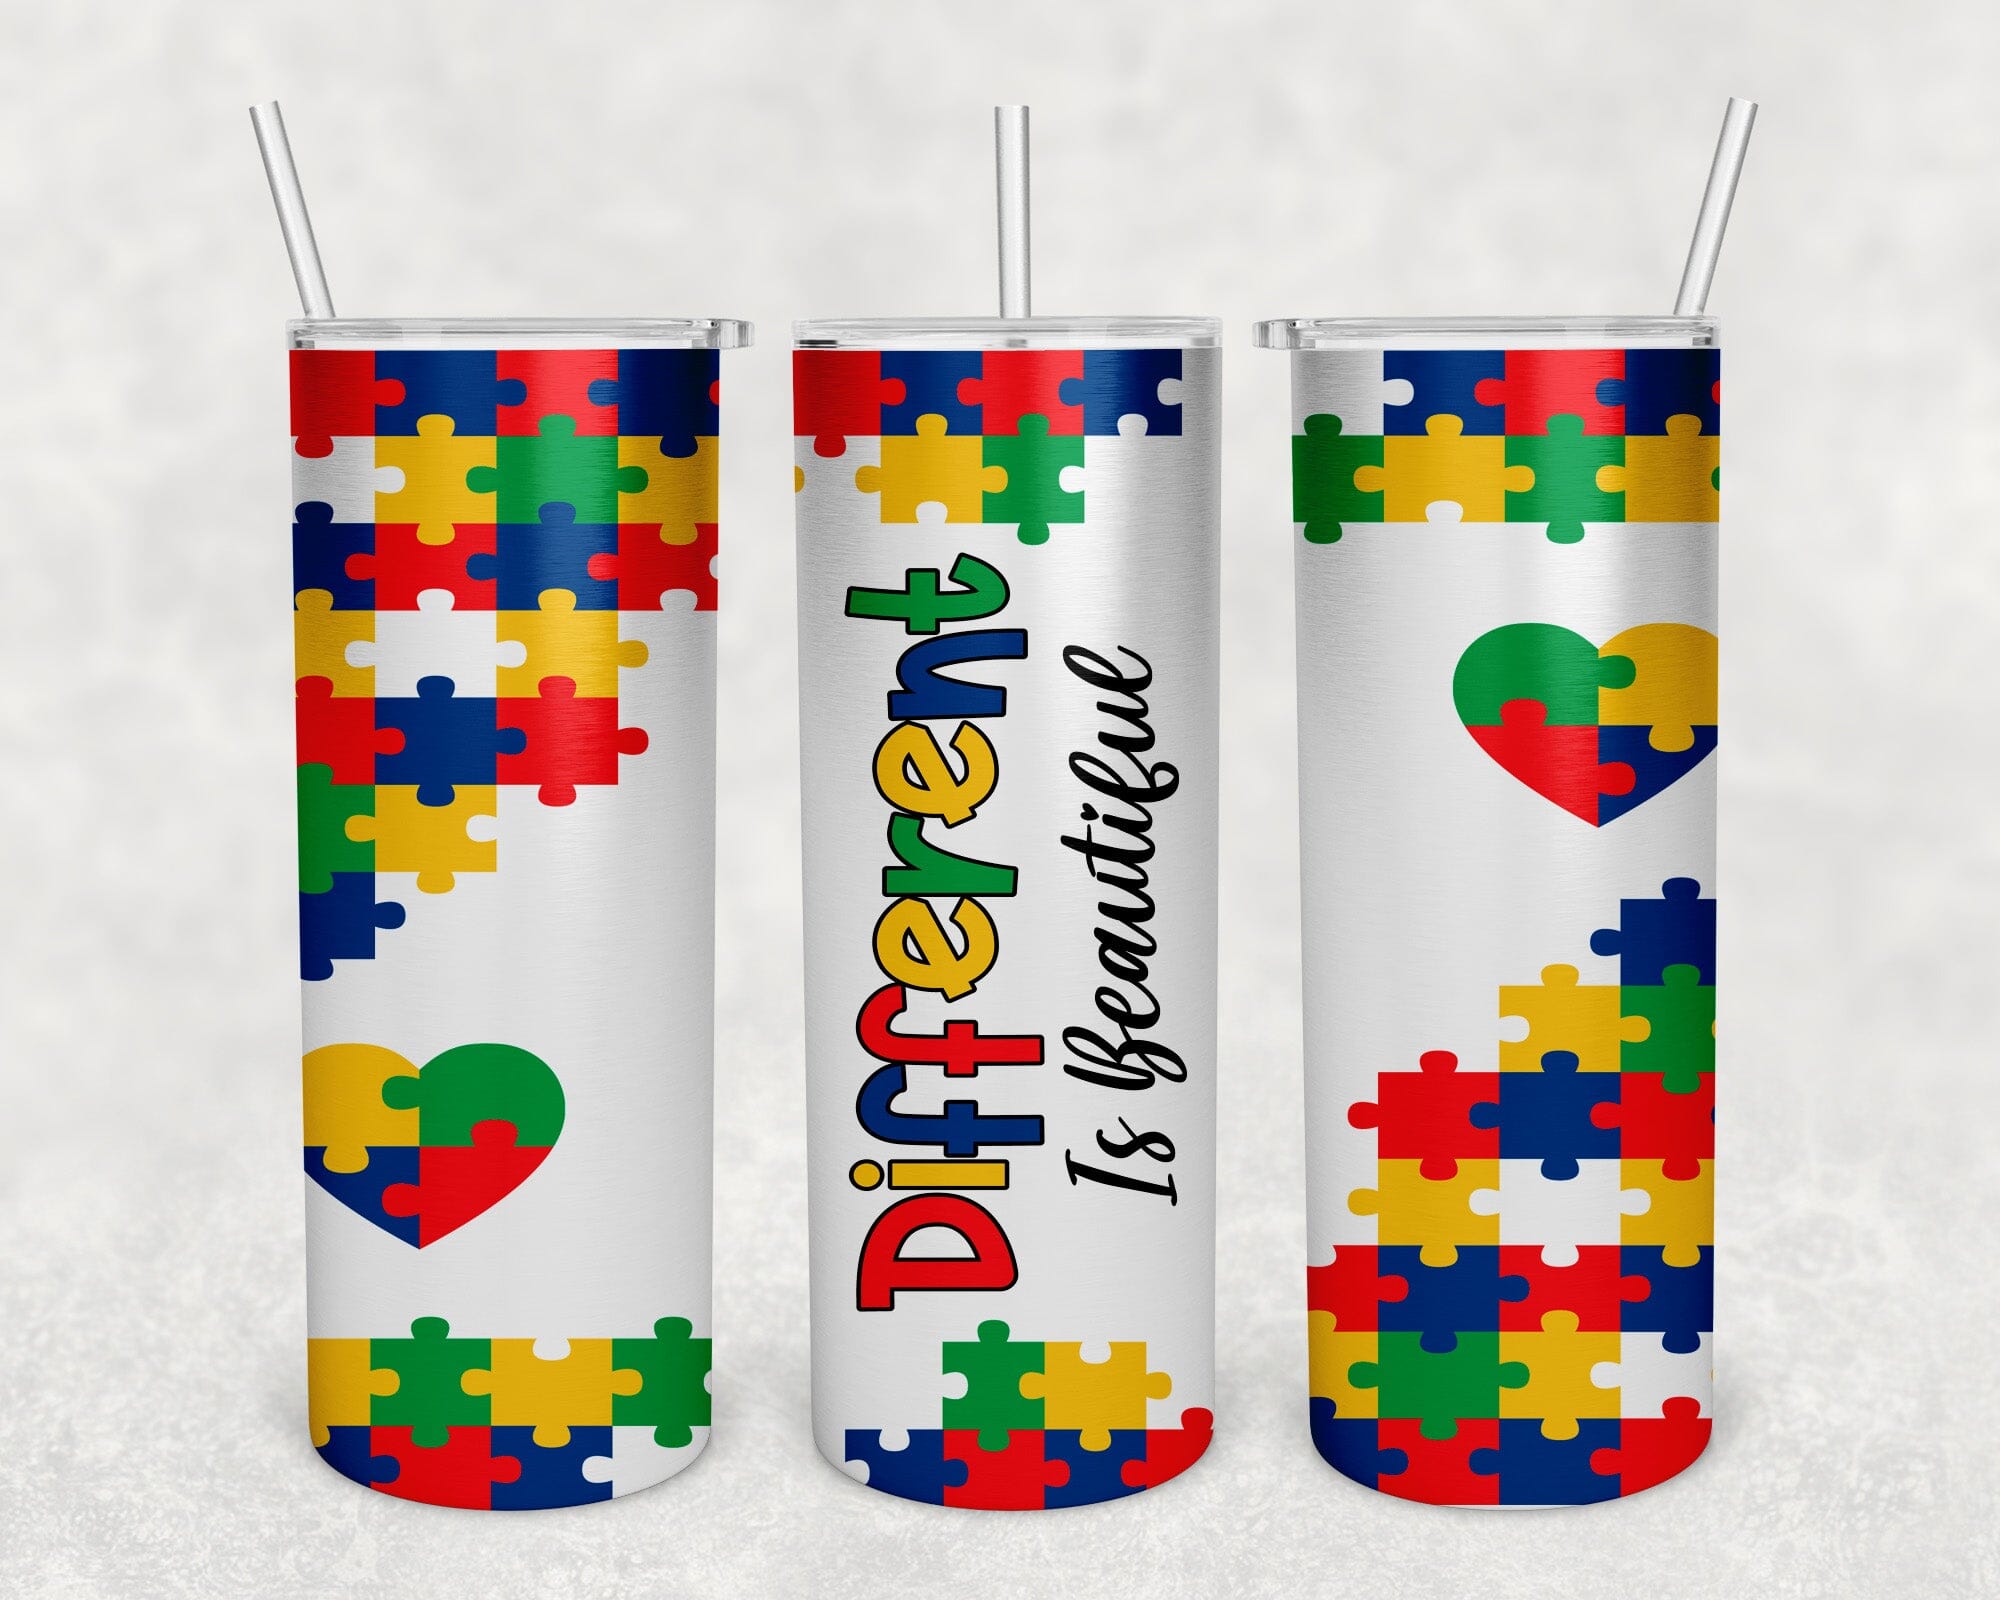 https://cdn.shopify.com/s/files/1/0659/8390/6035/products/autism-awarness-tumbler-gravesfamilycreations-526919.jpg?v=1689508944